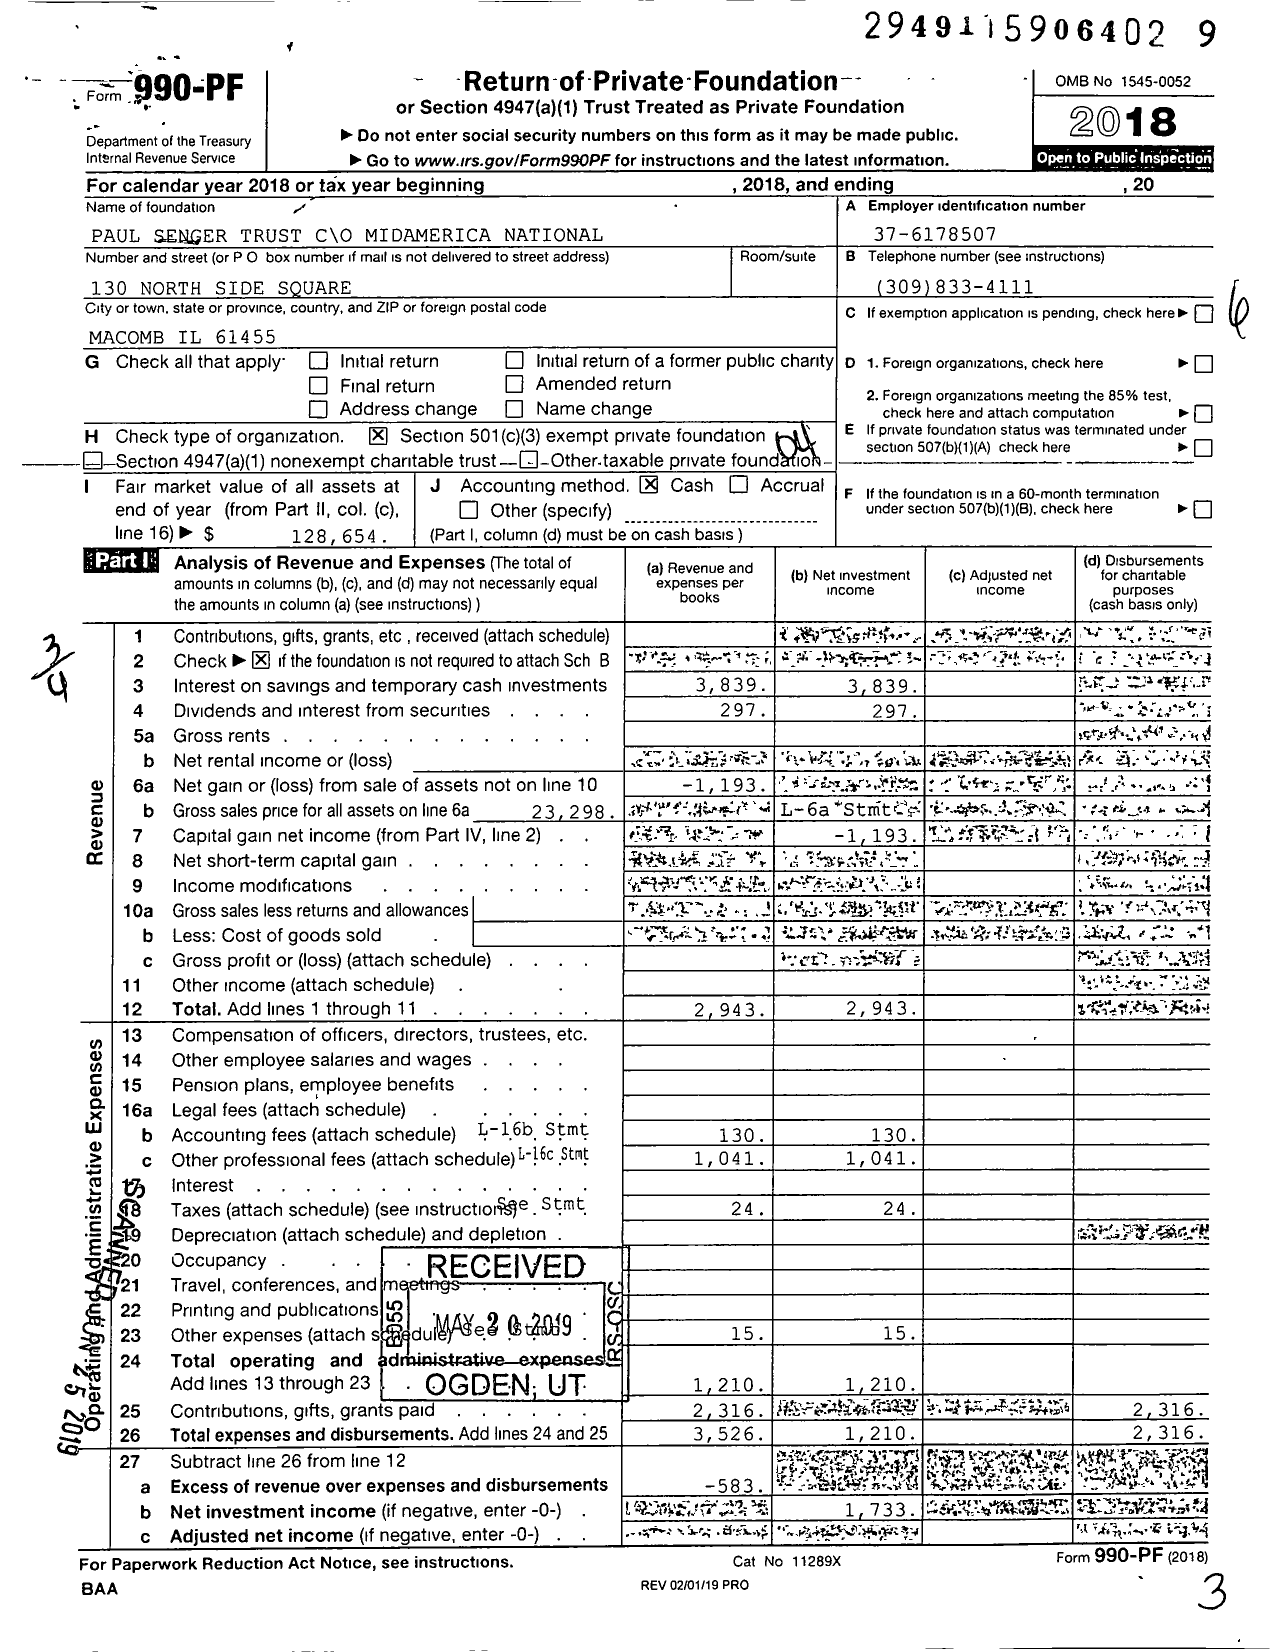 Image of first page of 2018 Form 990PF for Paul Senger Tuw 530